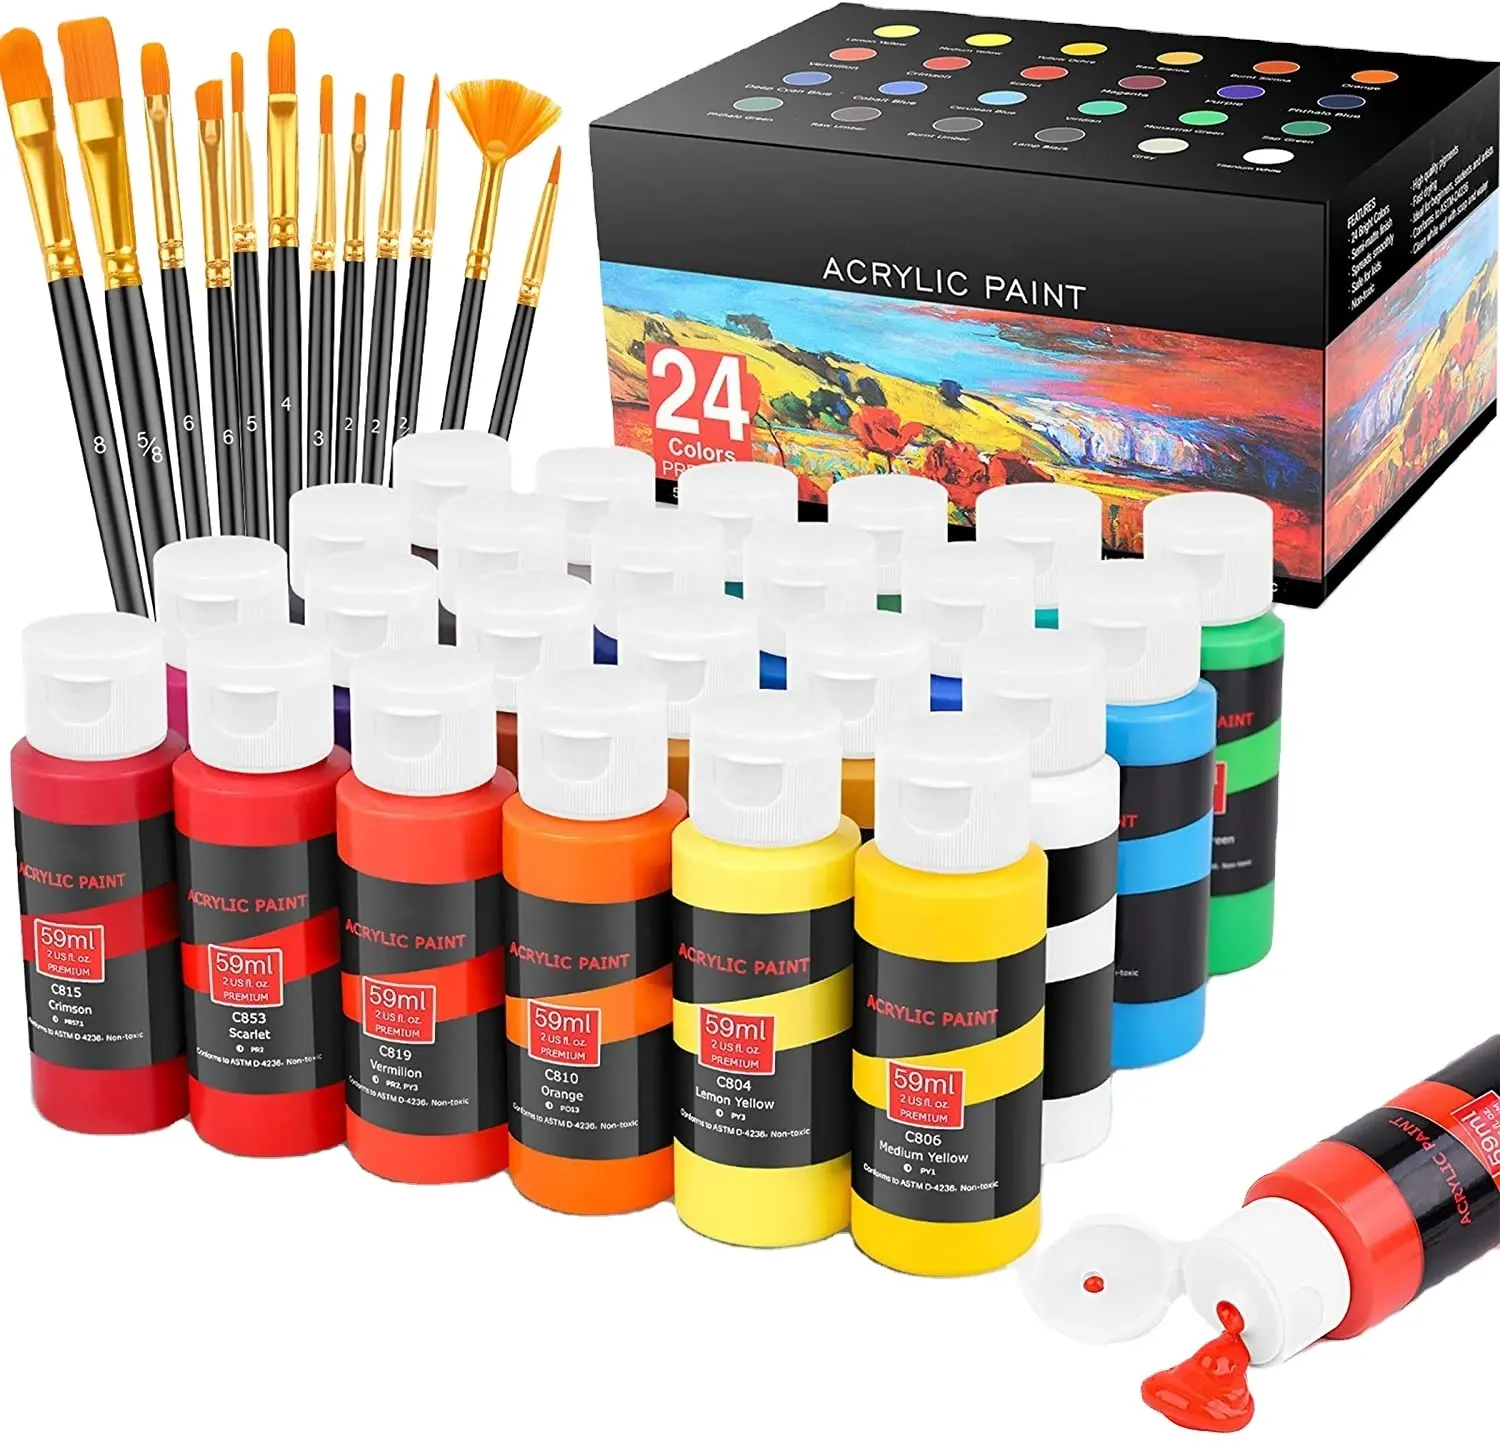 24 colors 60ml acrylic paint for canvas painting acrylic Colour set Acrylic Paint Set art supply kit